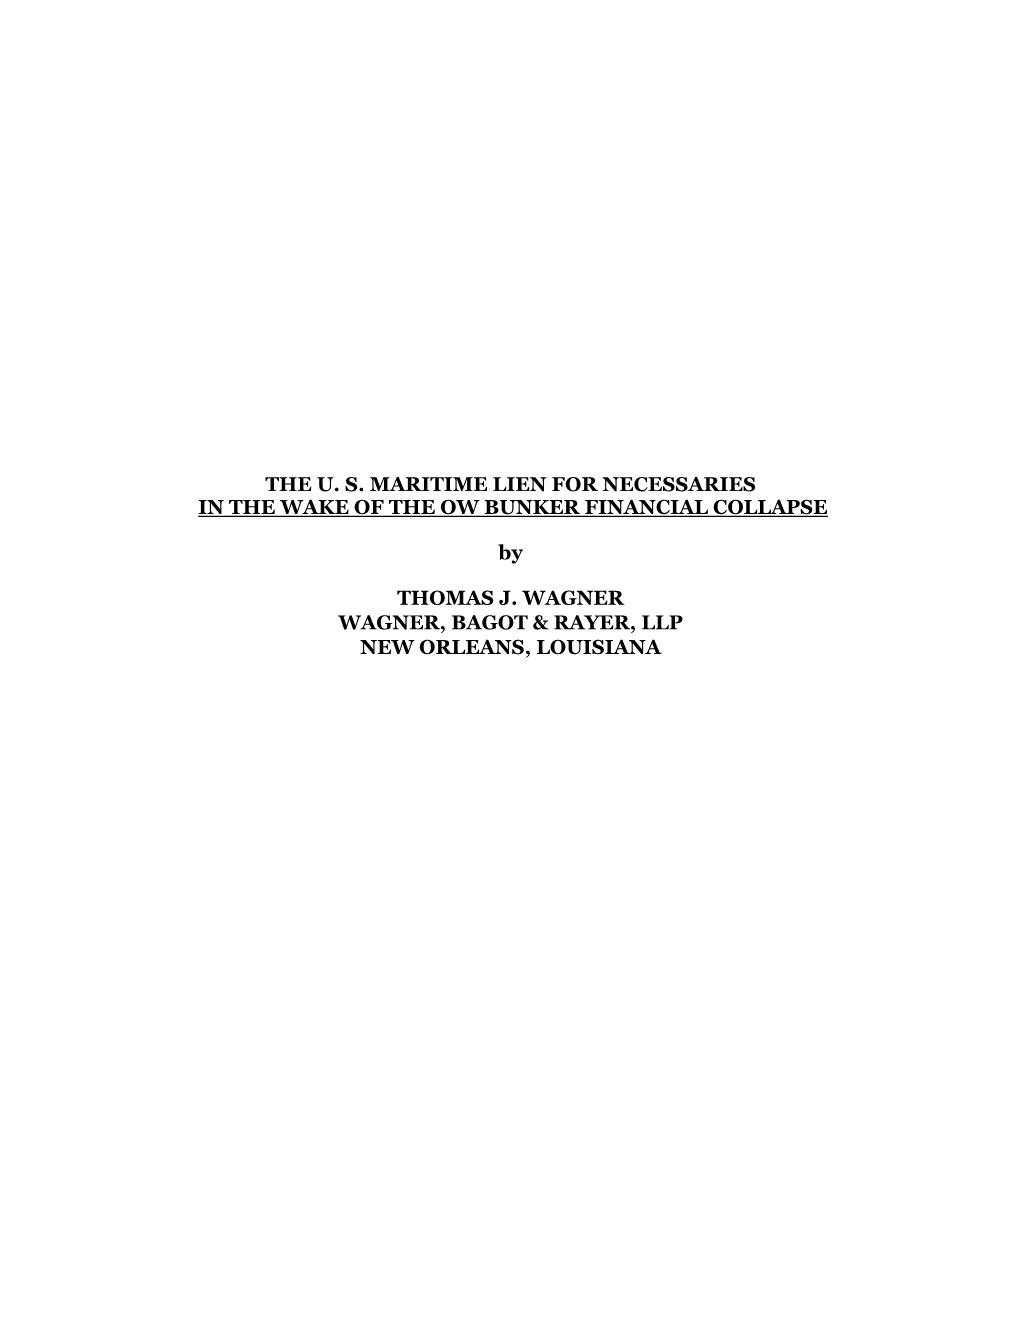 The U. S. Maritime Lien for Necessaries in the Wake of the Ow Bunker Financial Collapse